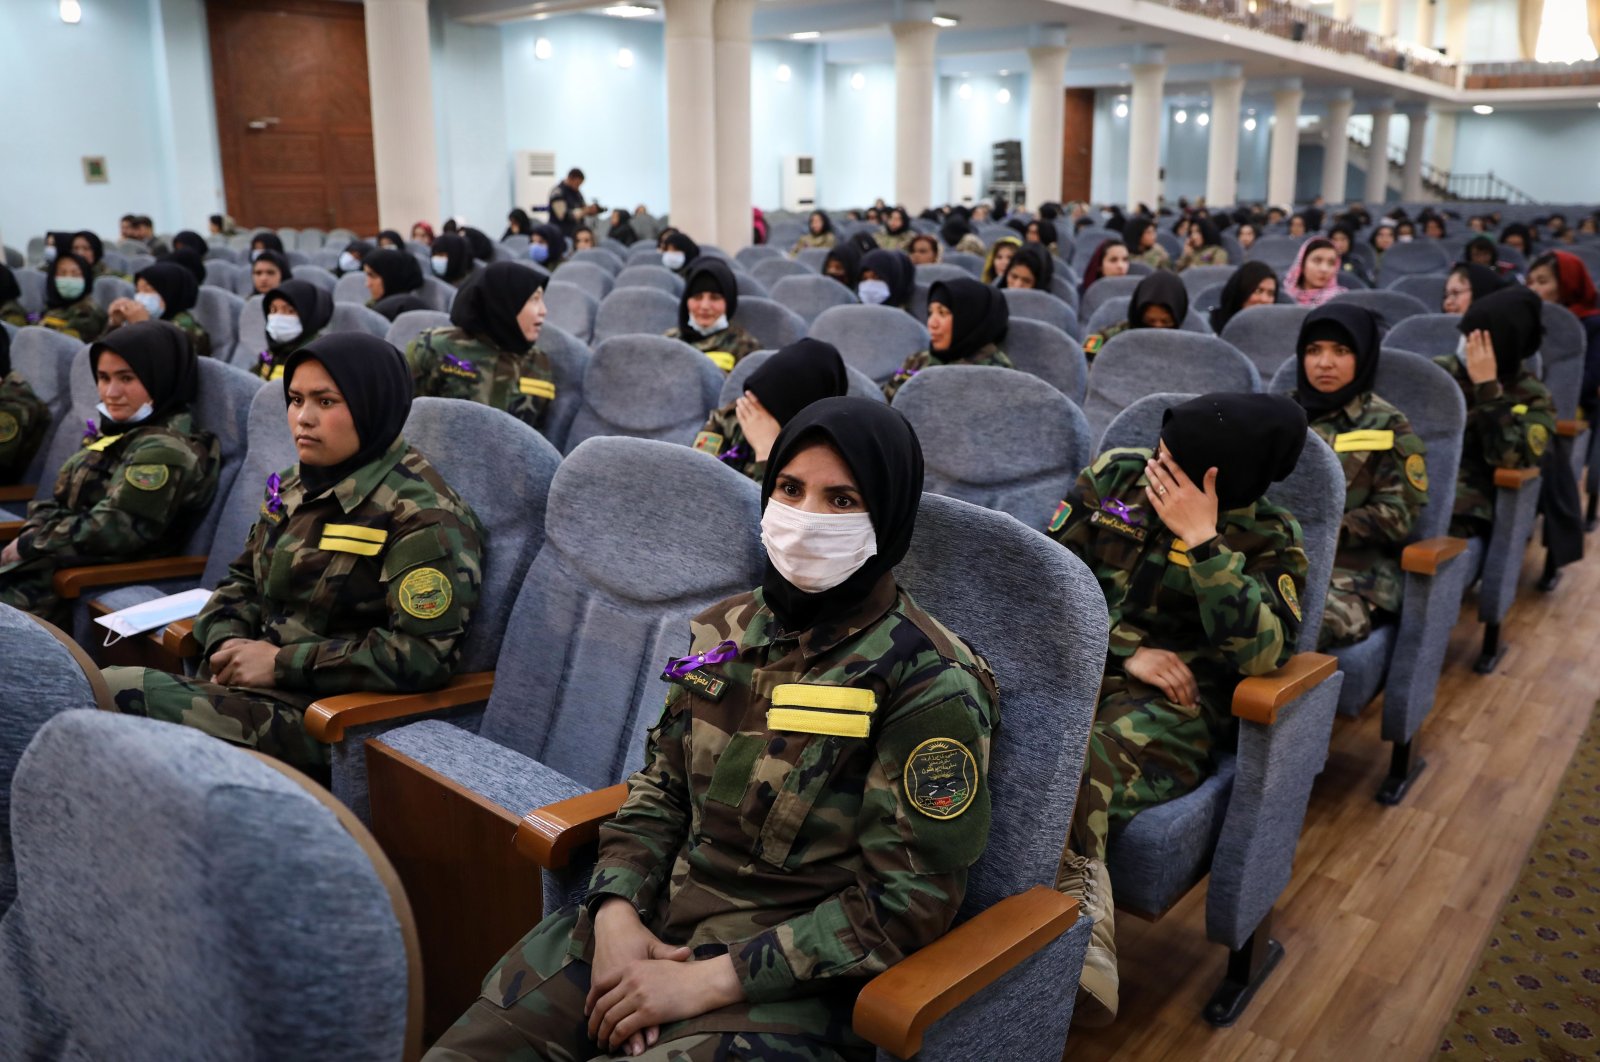 Female police officers attend an event ahead of International Women's Day, in Kabul, Afghanistan, March 7, 2021. (EPA)